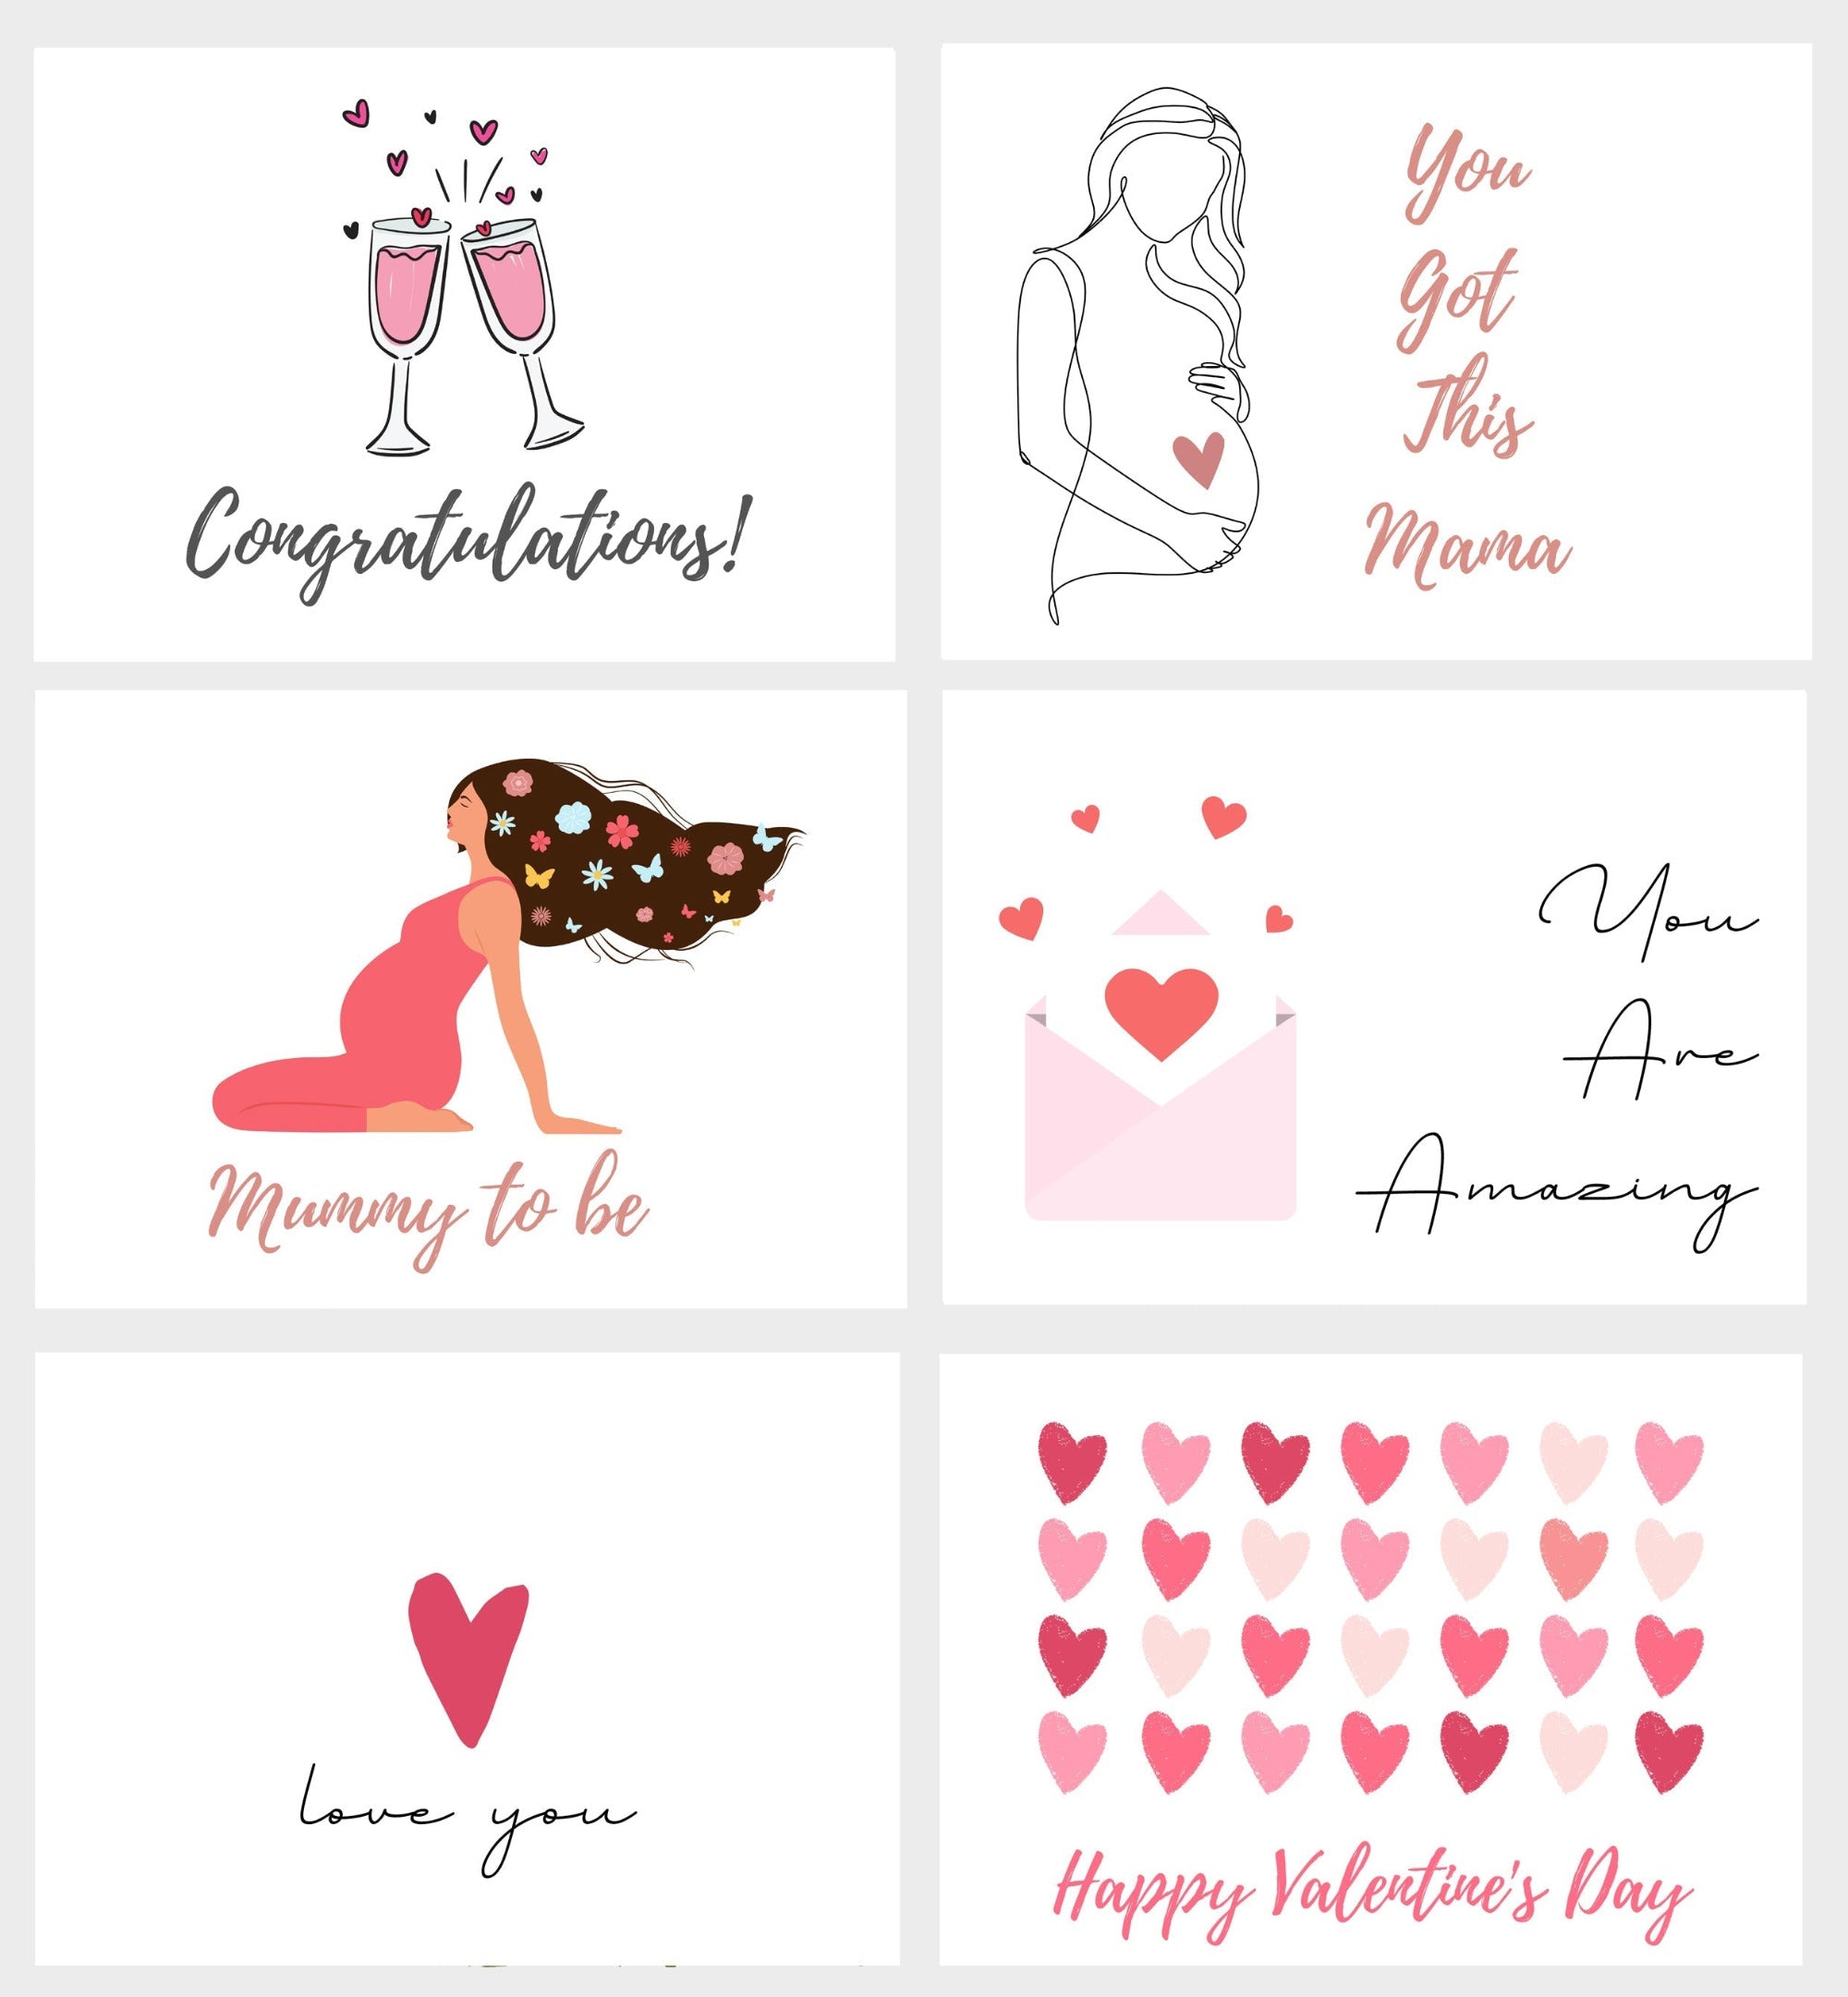 Amazon.com : Hallmark Everyday Love Card, Romantic Birthday Card,  Anniversary Card, Sweetest Day Card (Love Note) : Office Products